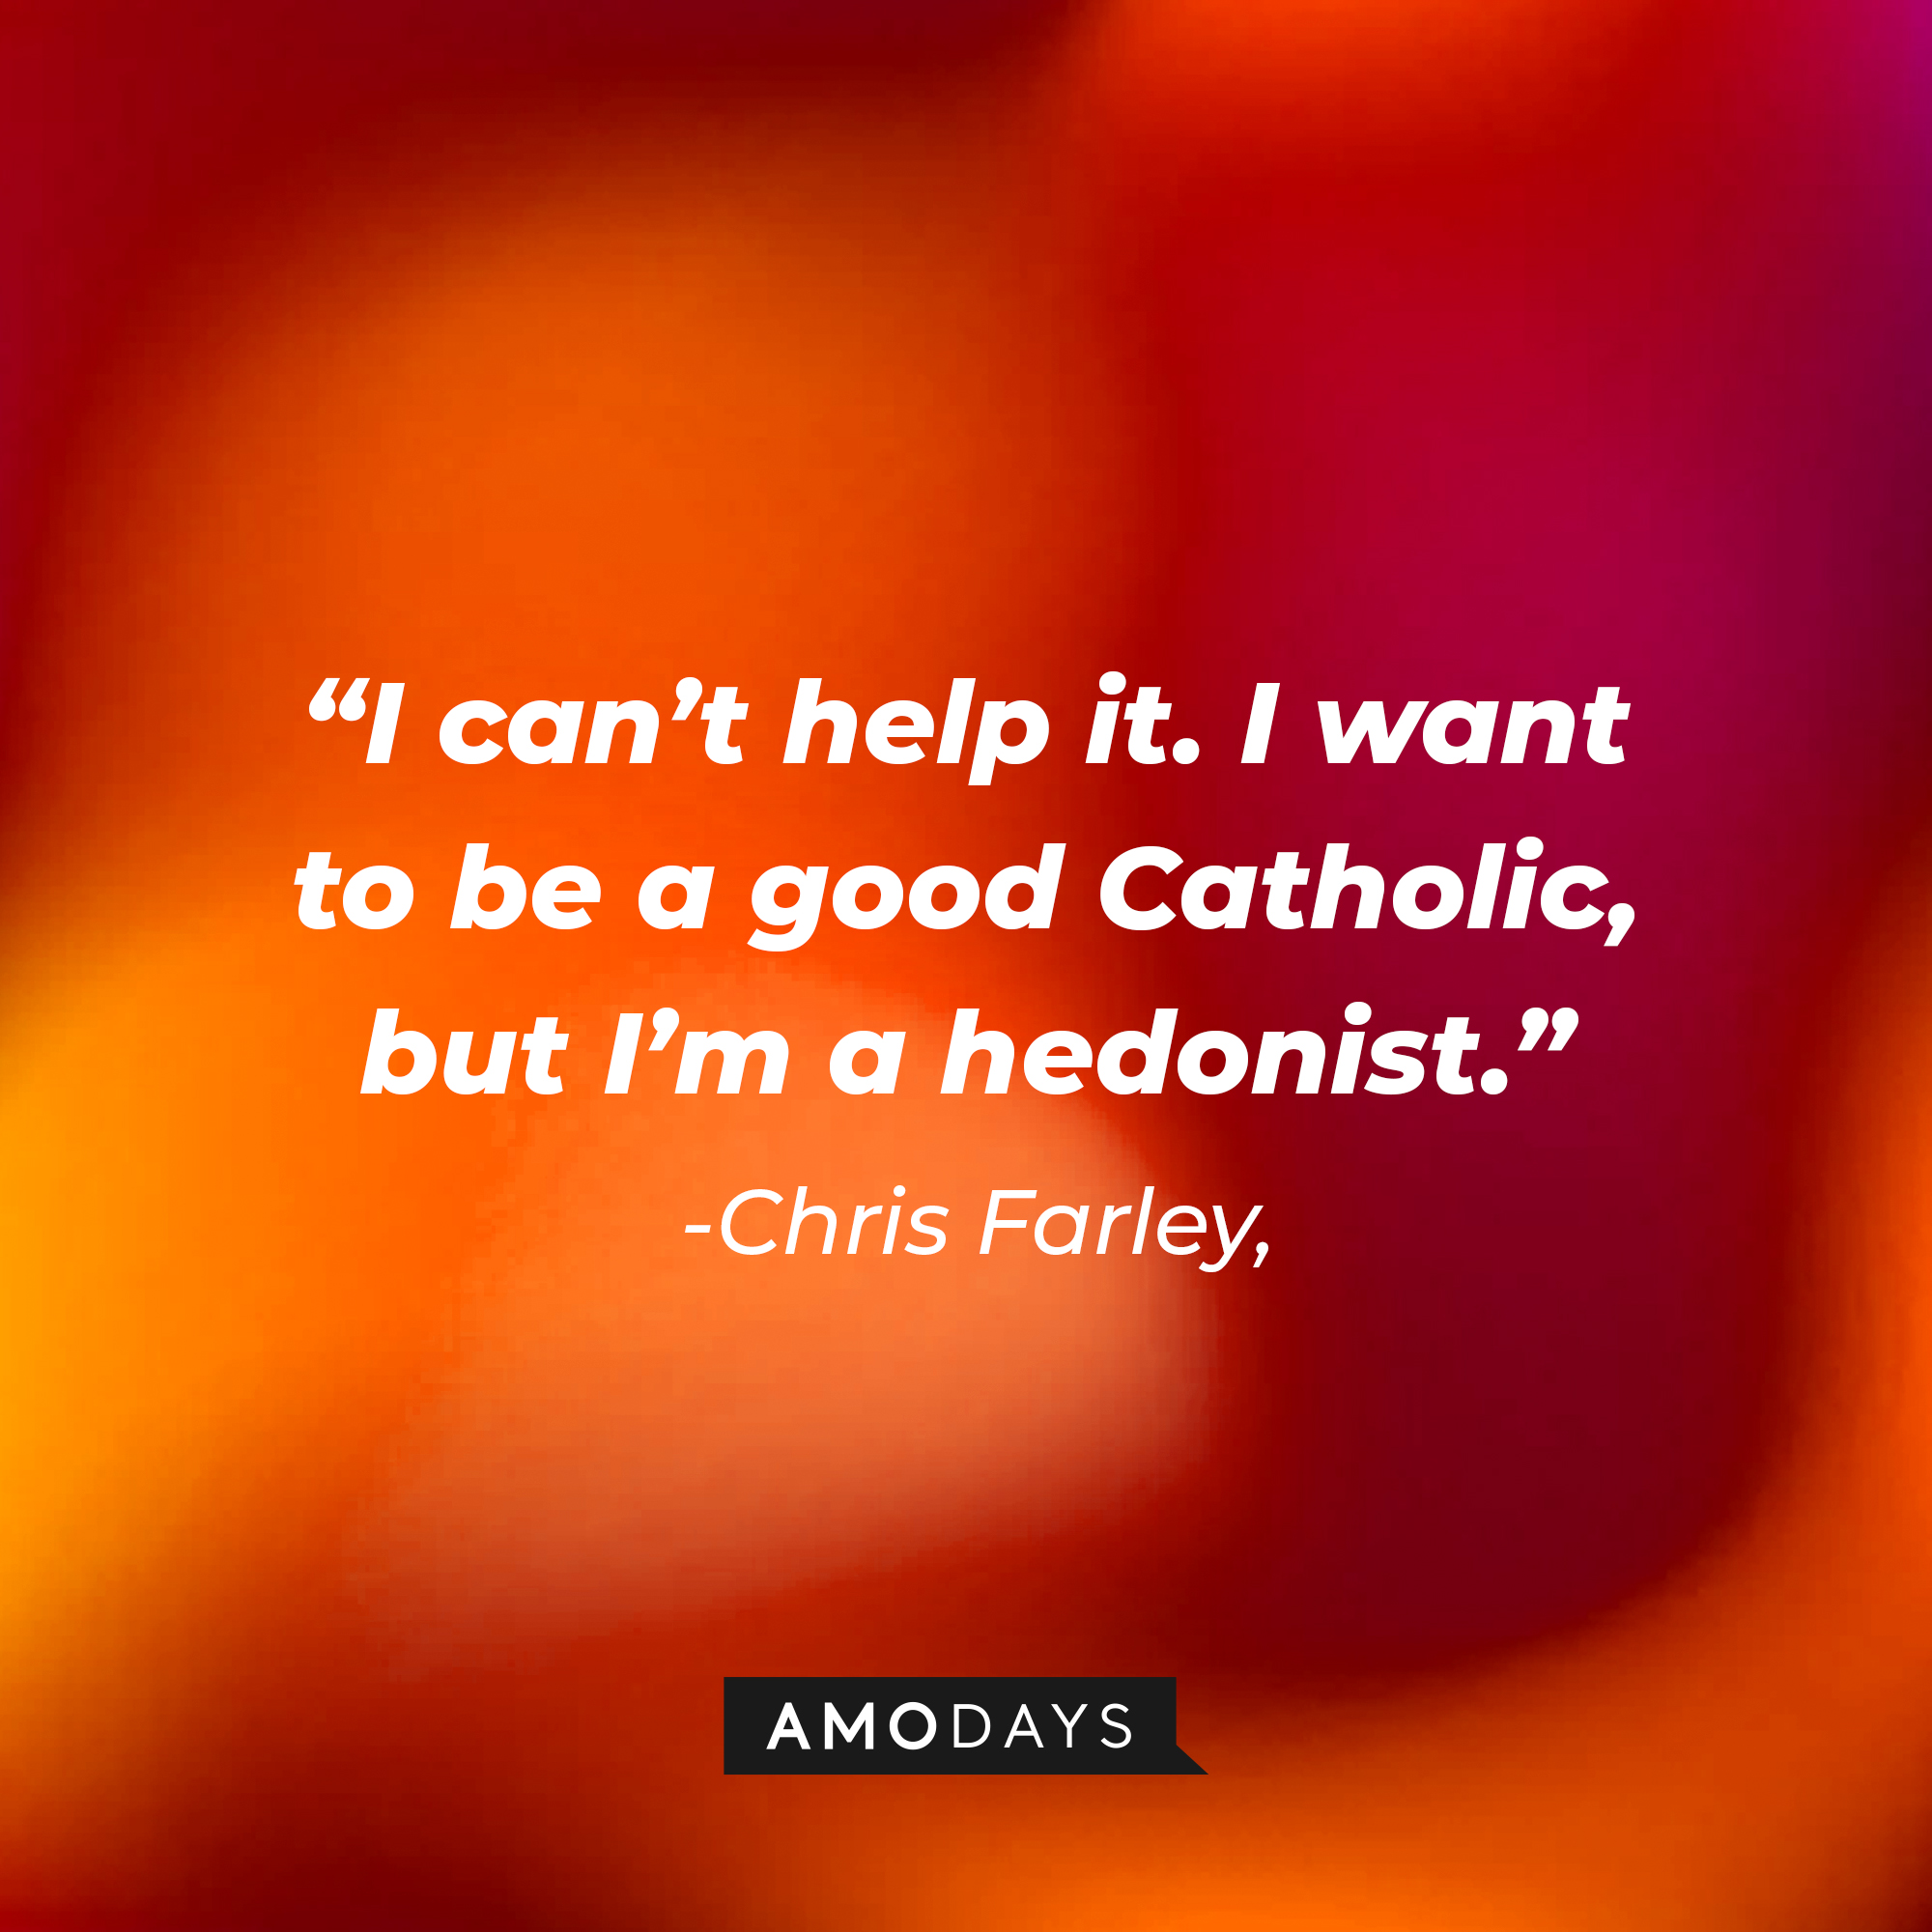 Chris Farley's quote: “I can’t help it. I want to be a good Catholic, but I’m a hedonist.” | Source: Amodays